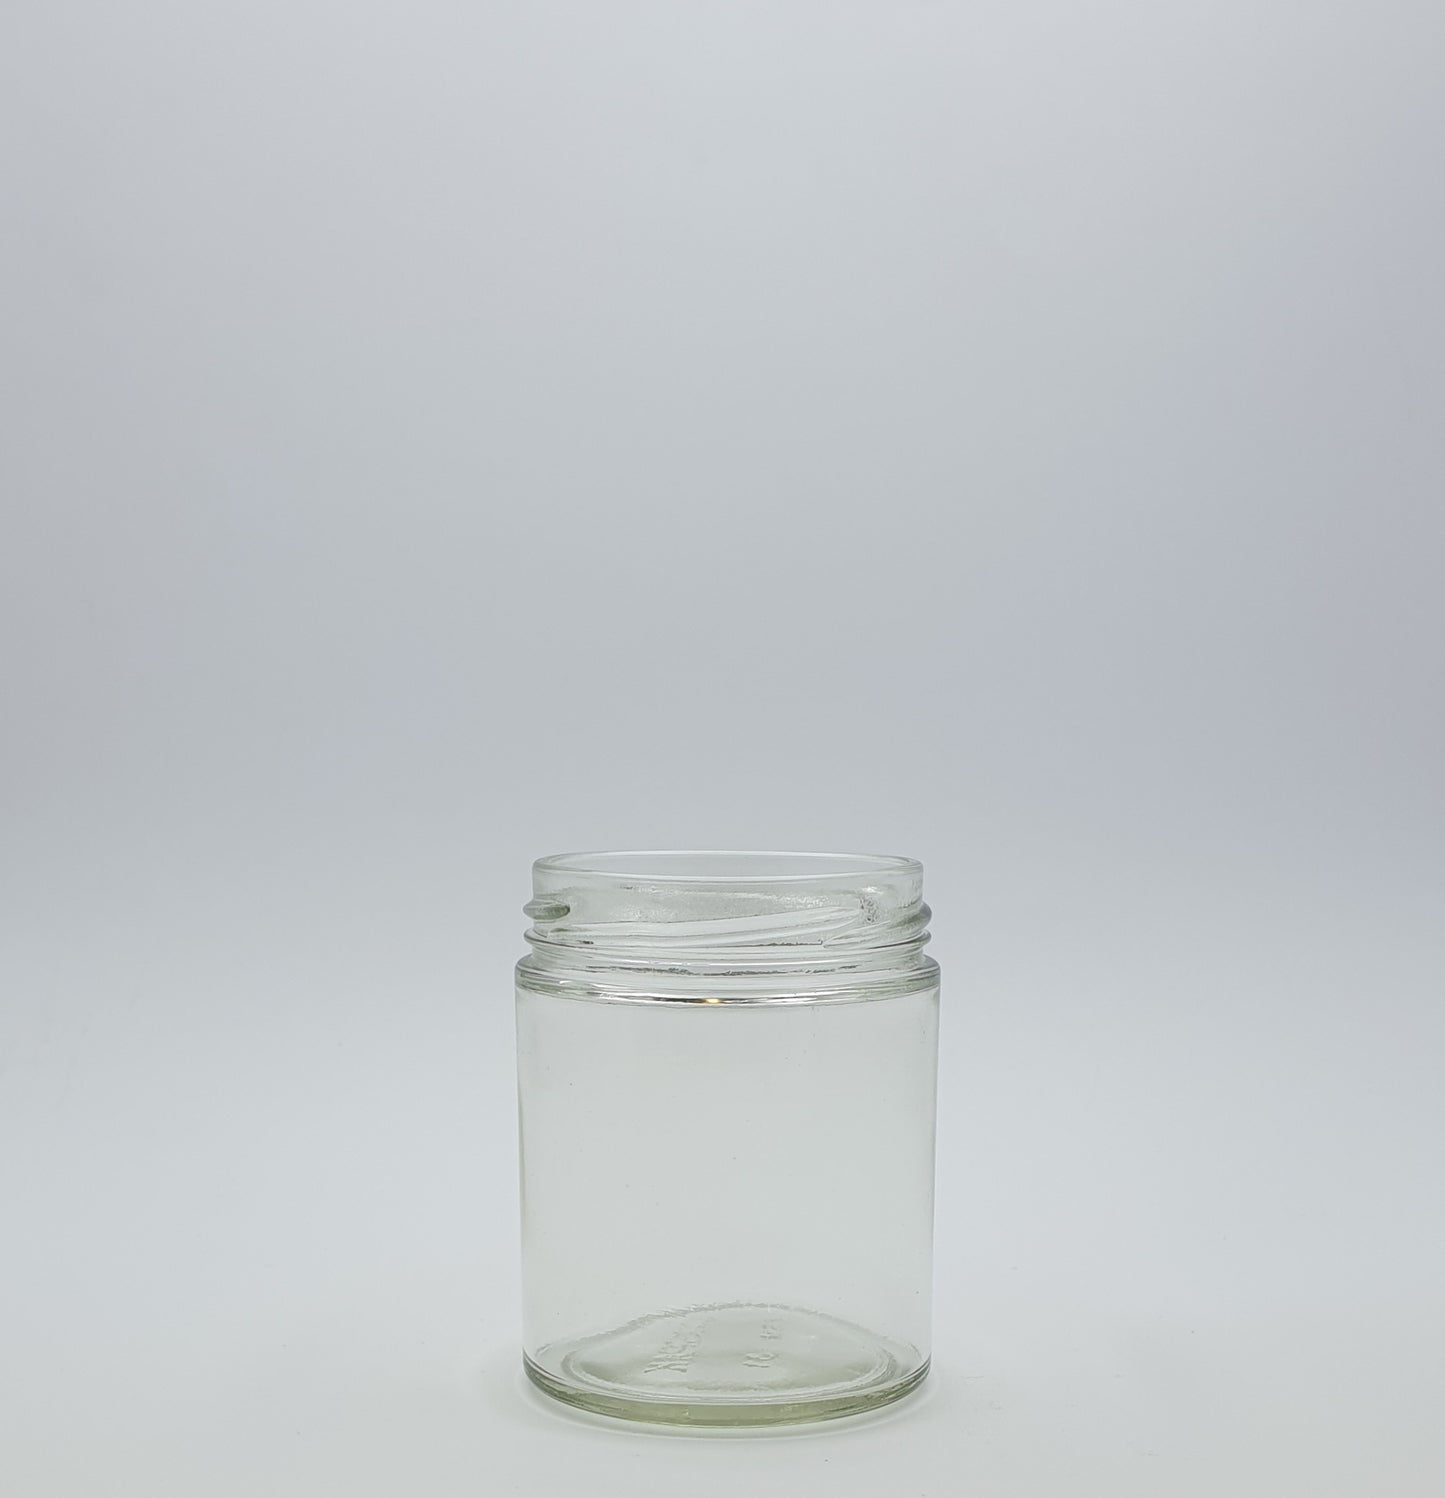 190ml Panelled Round Glass Jar without a lid. 